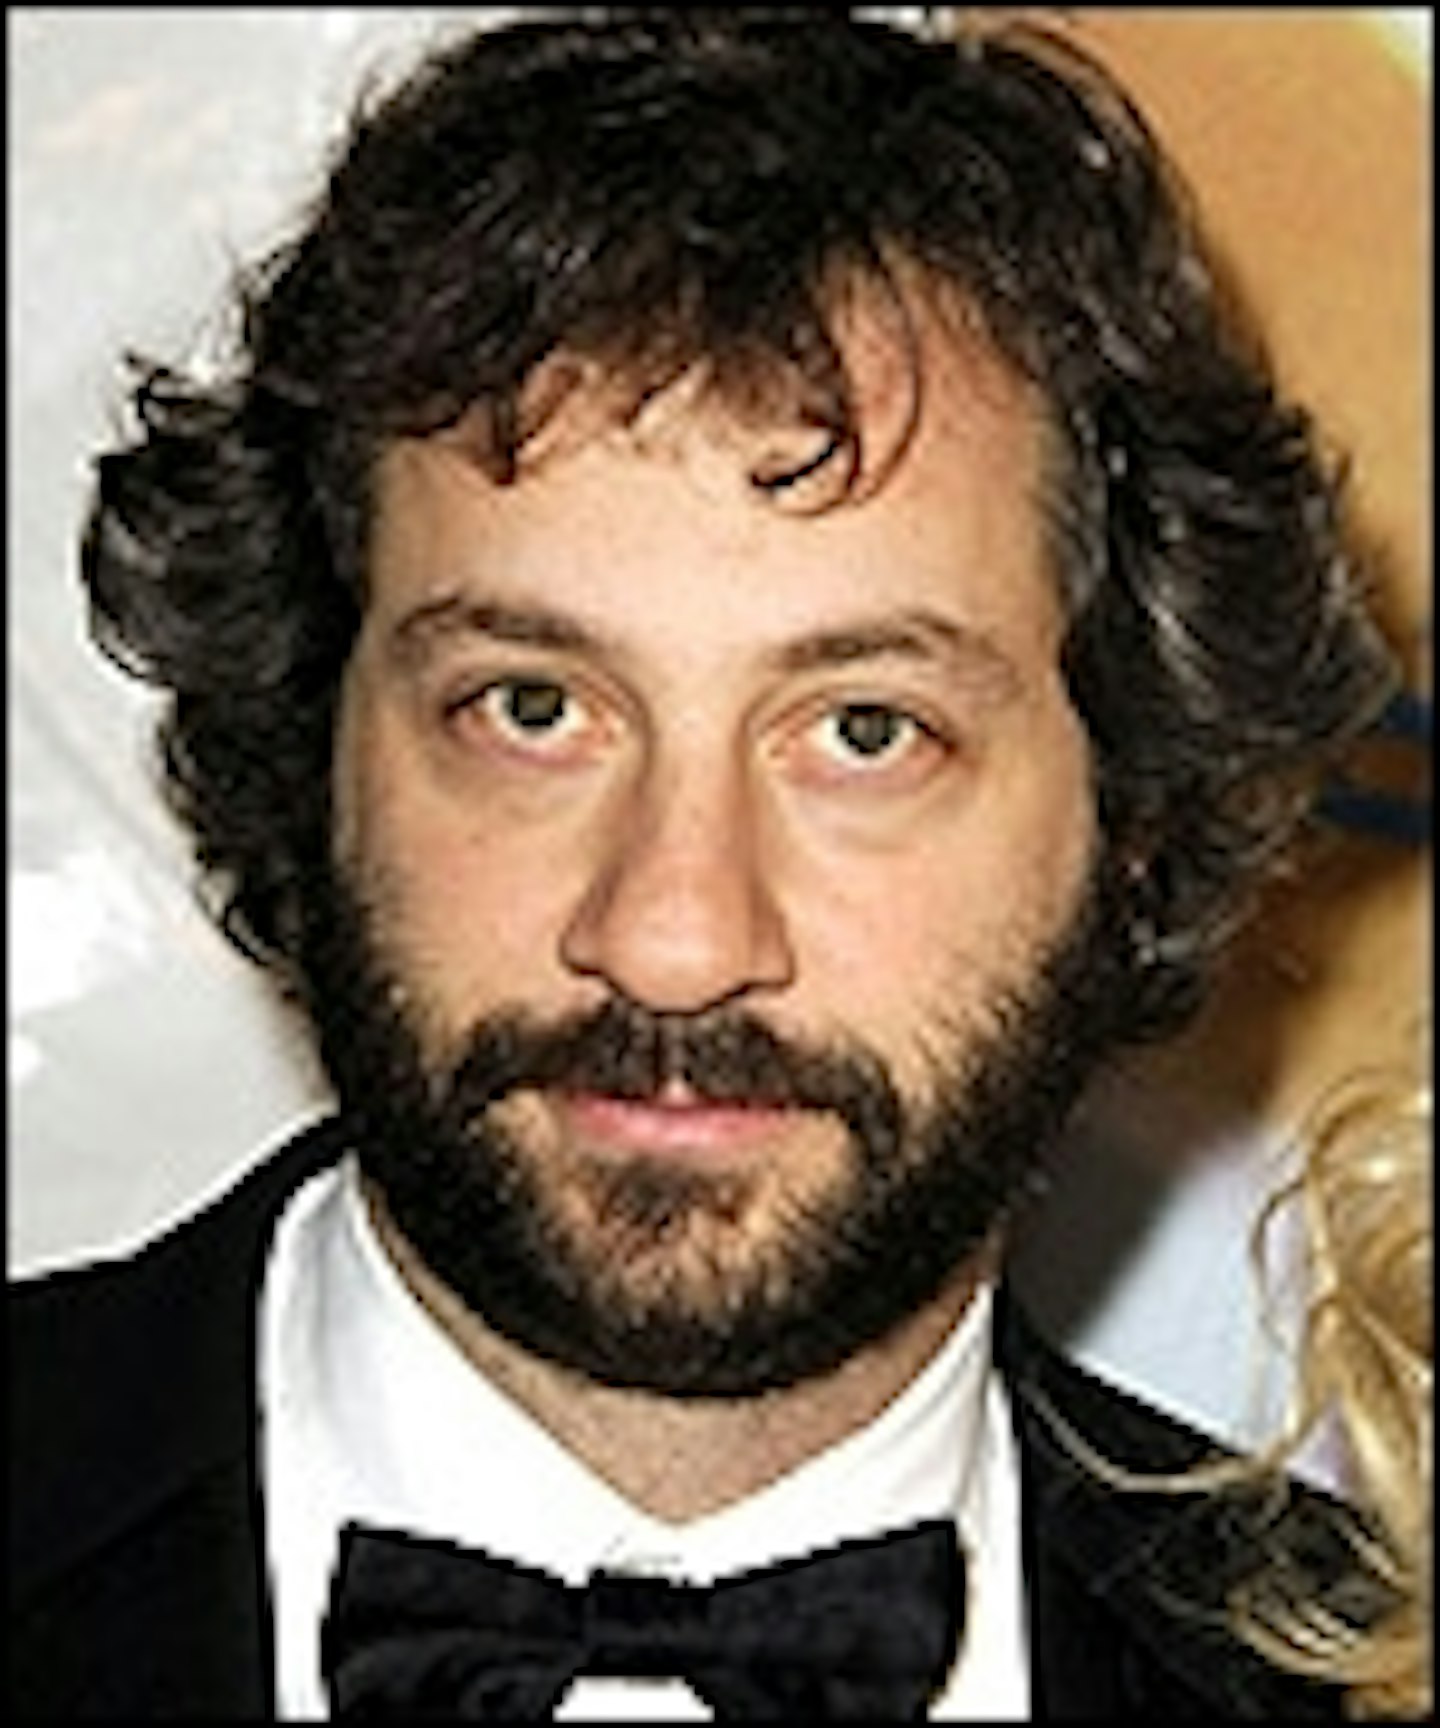 Judd Apatow Producing Super Bad